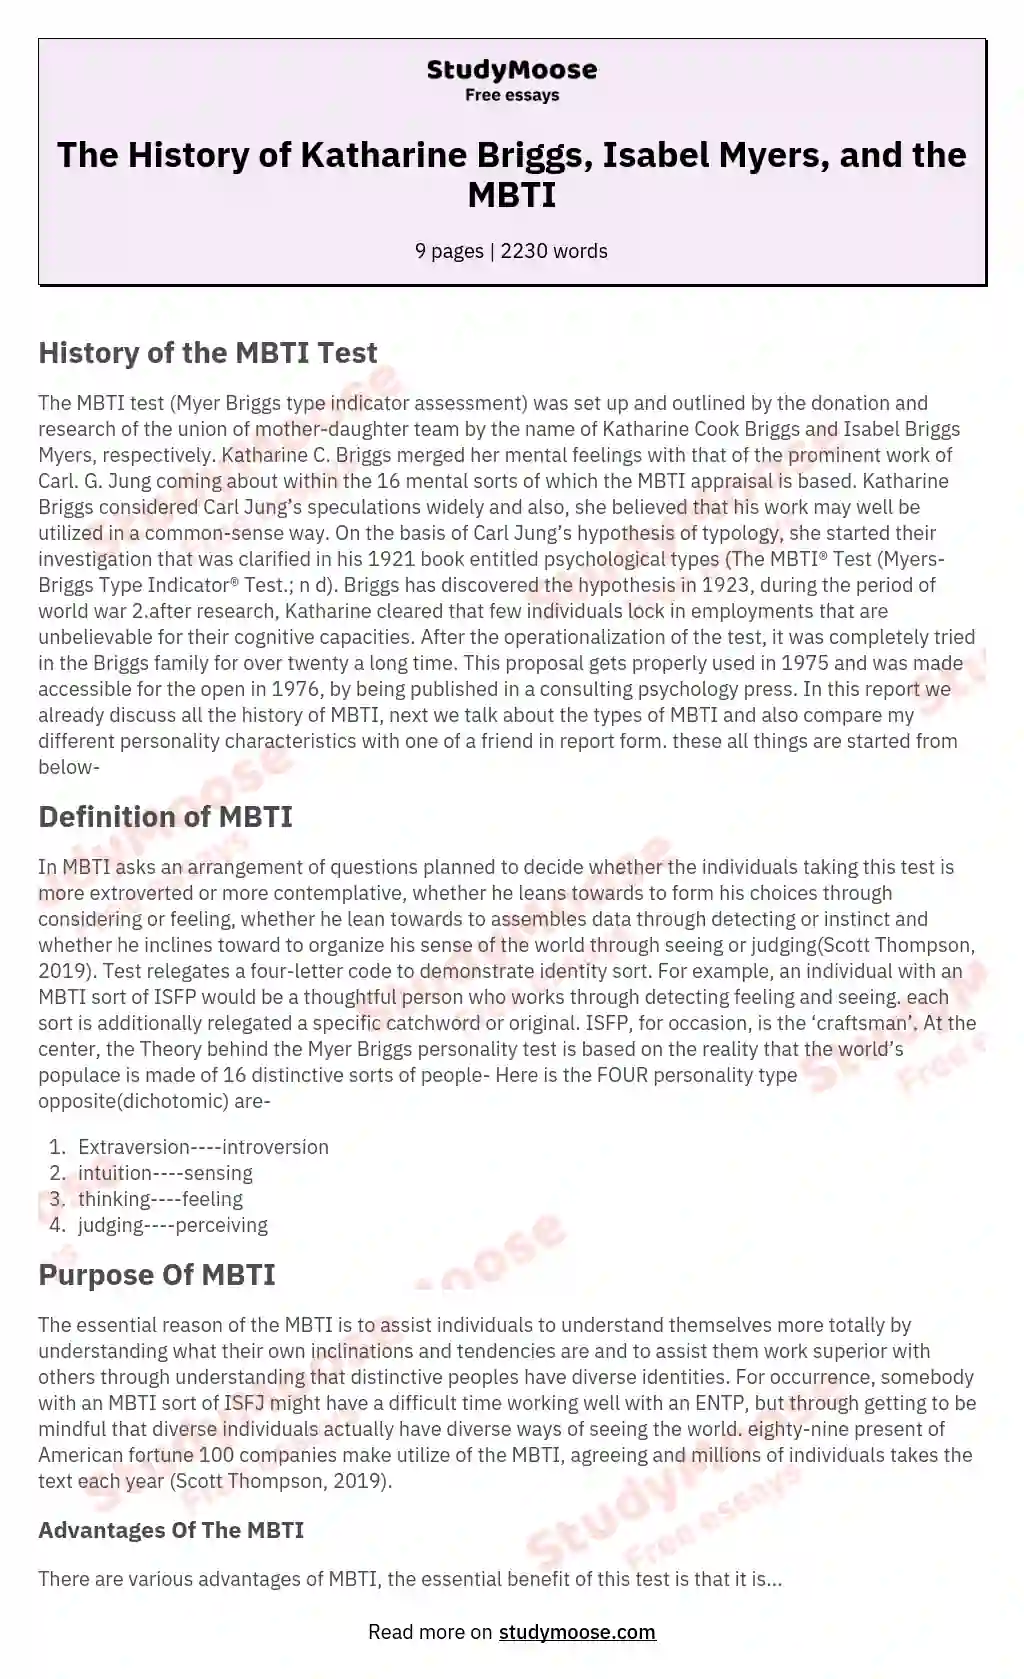 The History of Katharine Briggs, Isabel Myers, and the MBTI